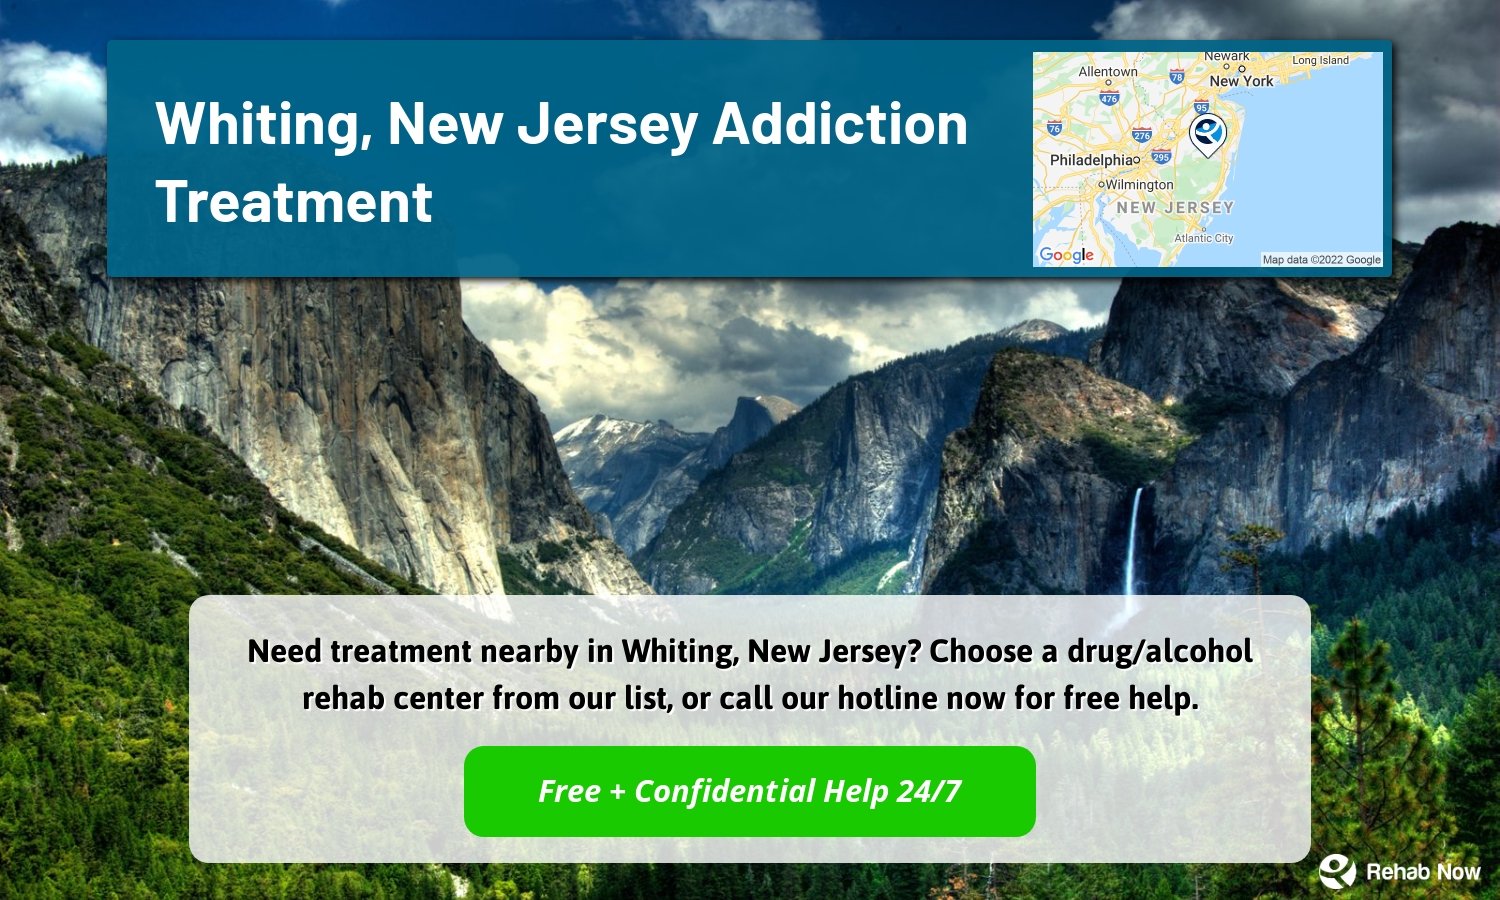 Need treatment nearby in Whiting, New Jersey? Choose a drug/alcohol rehab center from our list, or call our hotline now for free help.